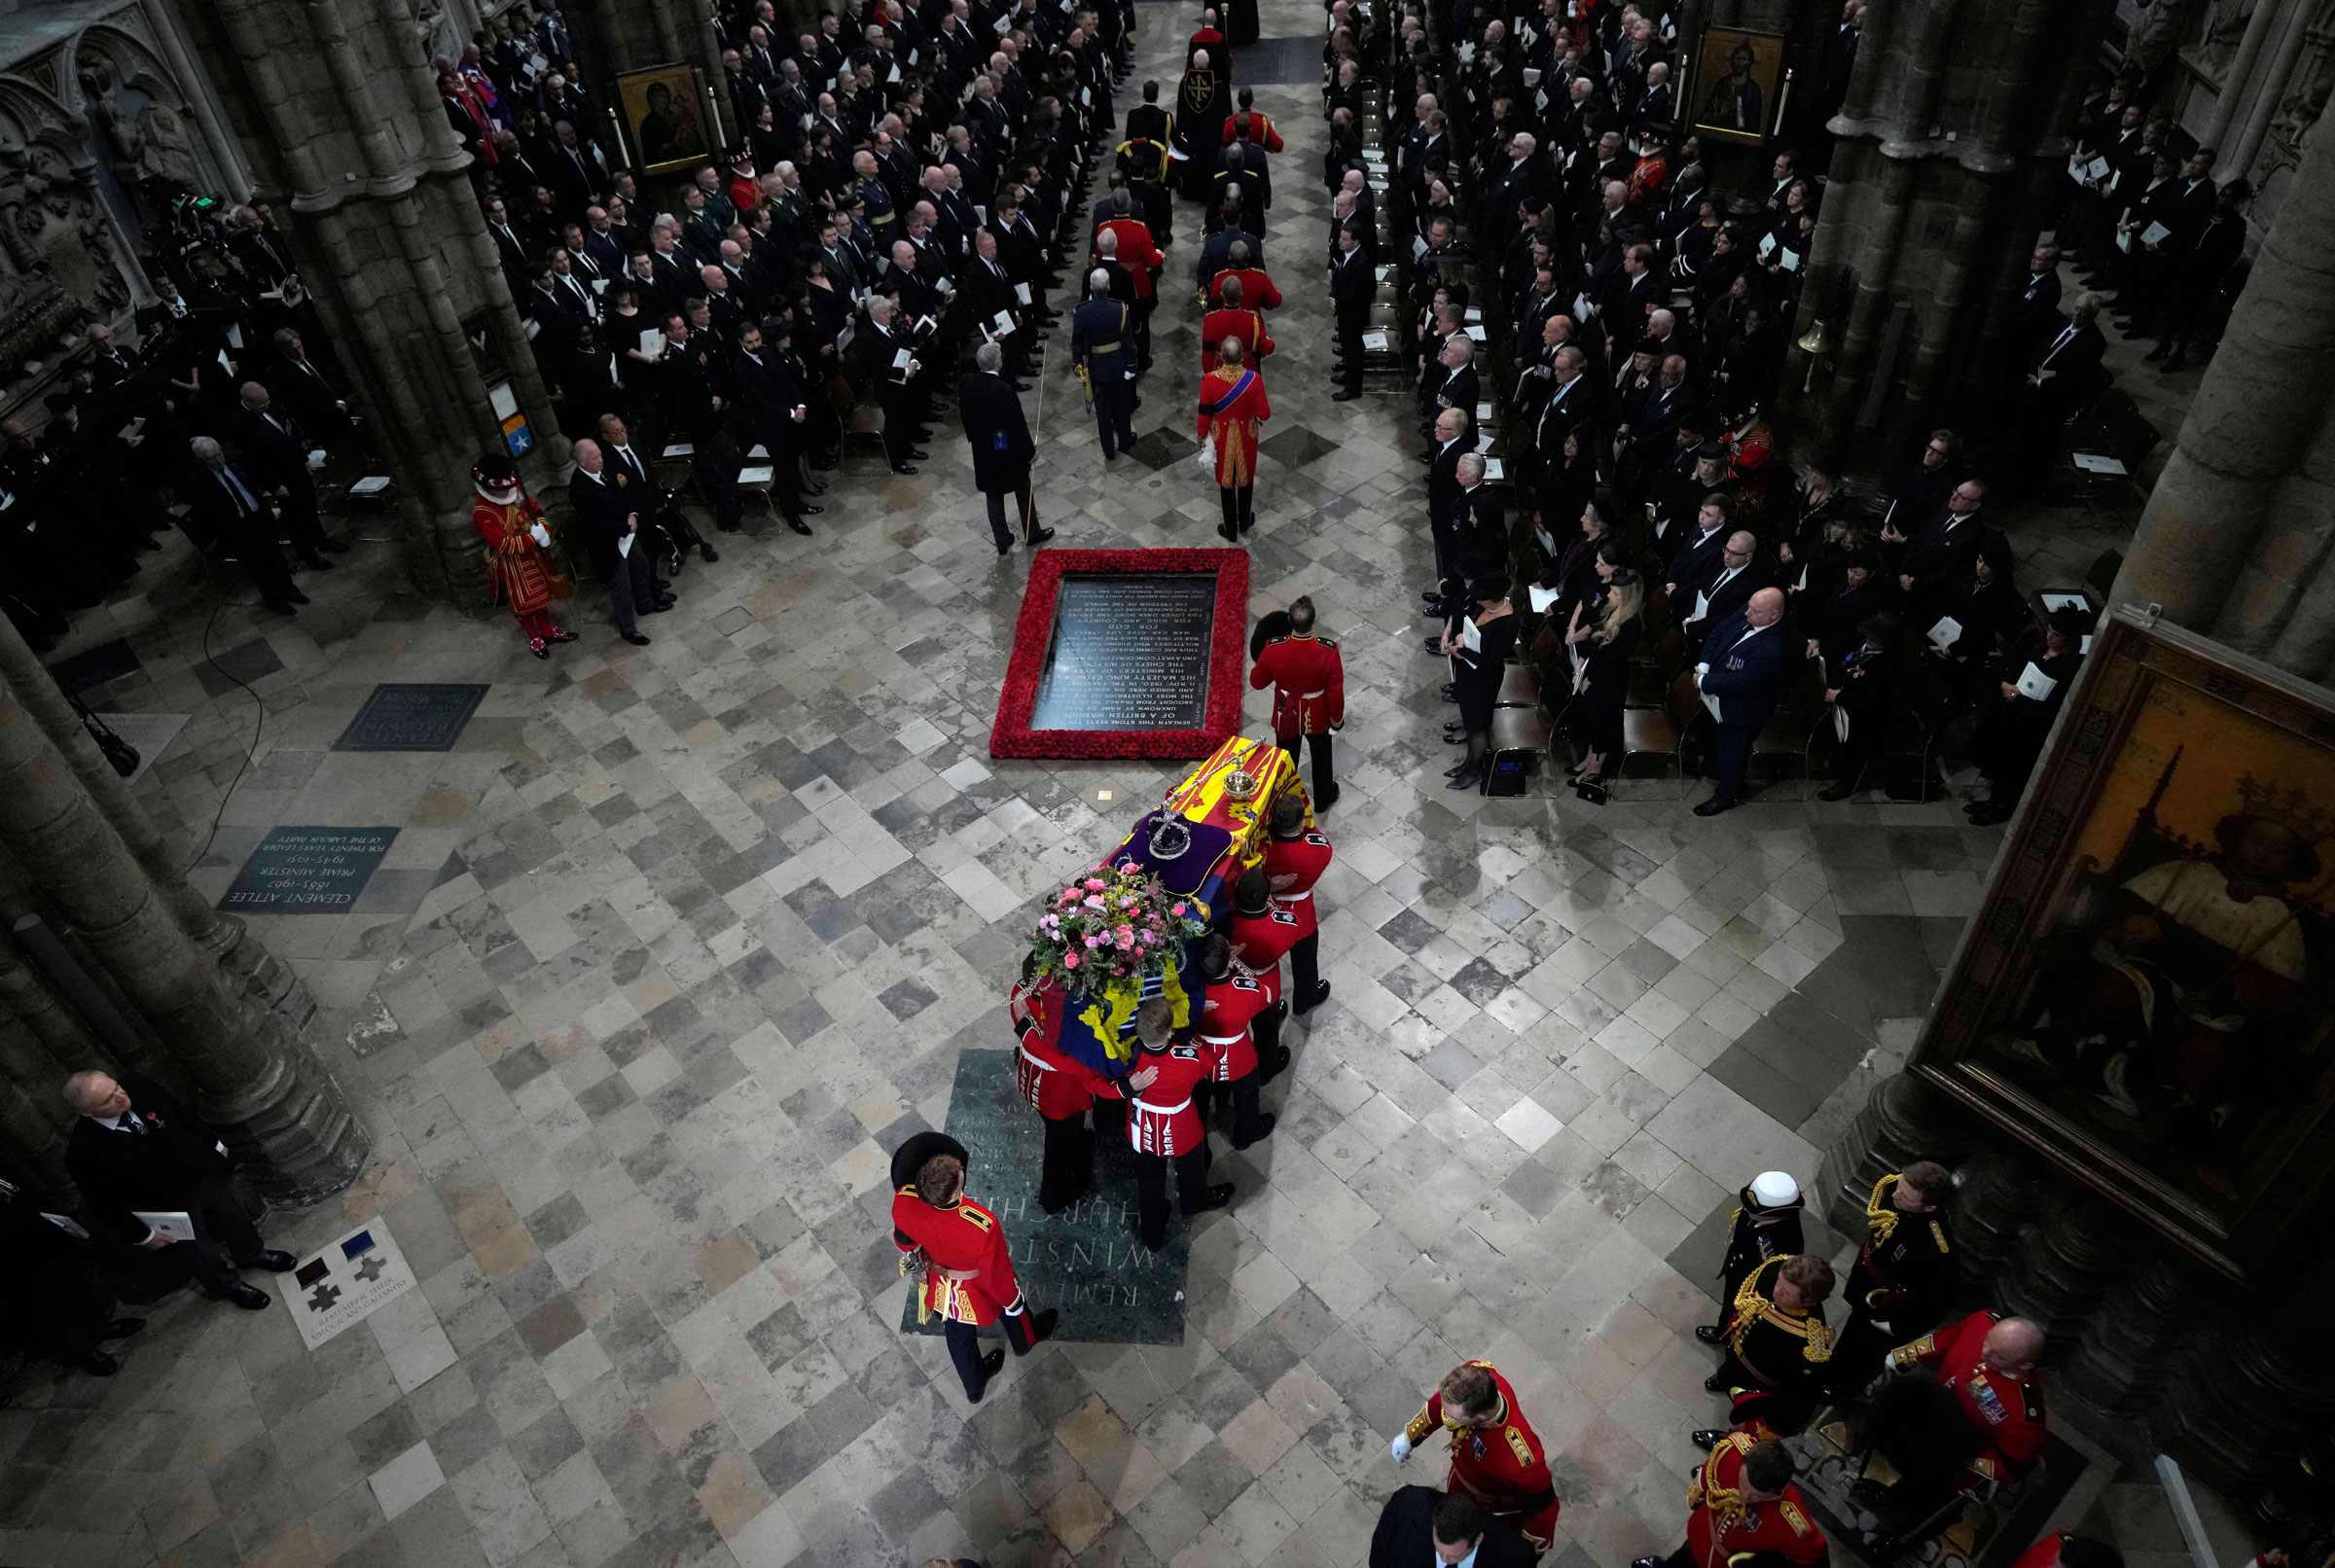 Queen Elizabeth II's casket with the Imperial State Crown resting on top is carried by the pall bearer into Westminster Abbey during the state funeral of Queen Elizabeth II.  (Frank Augstein—Pool/AFP/Getty Images)